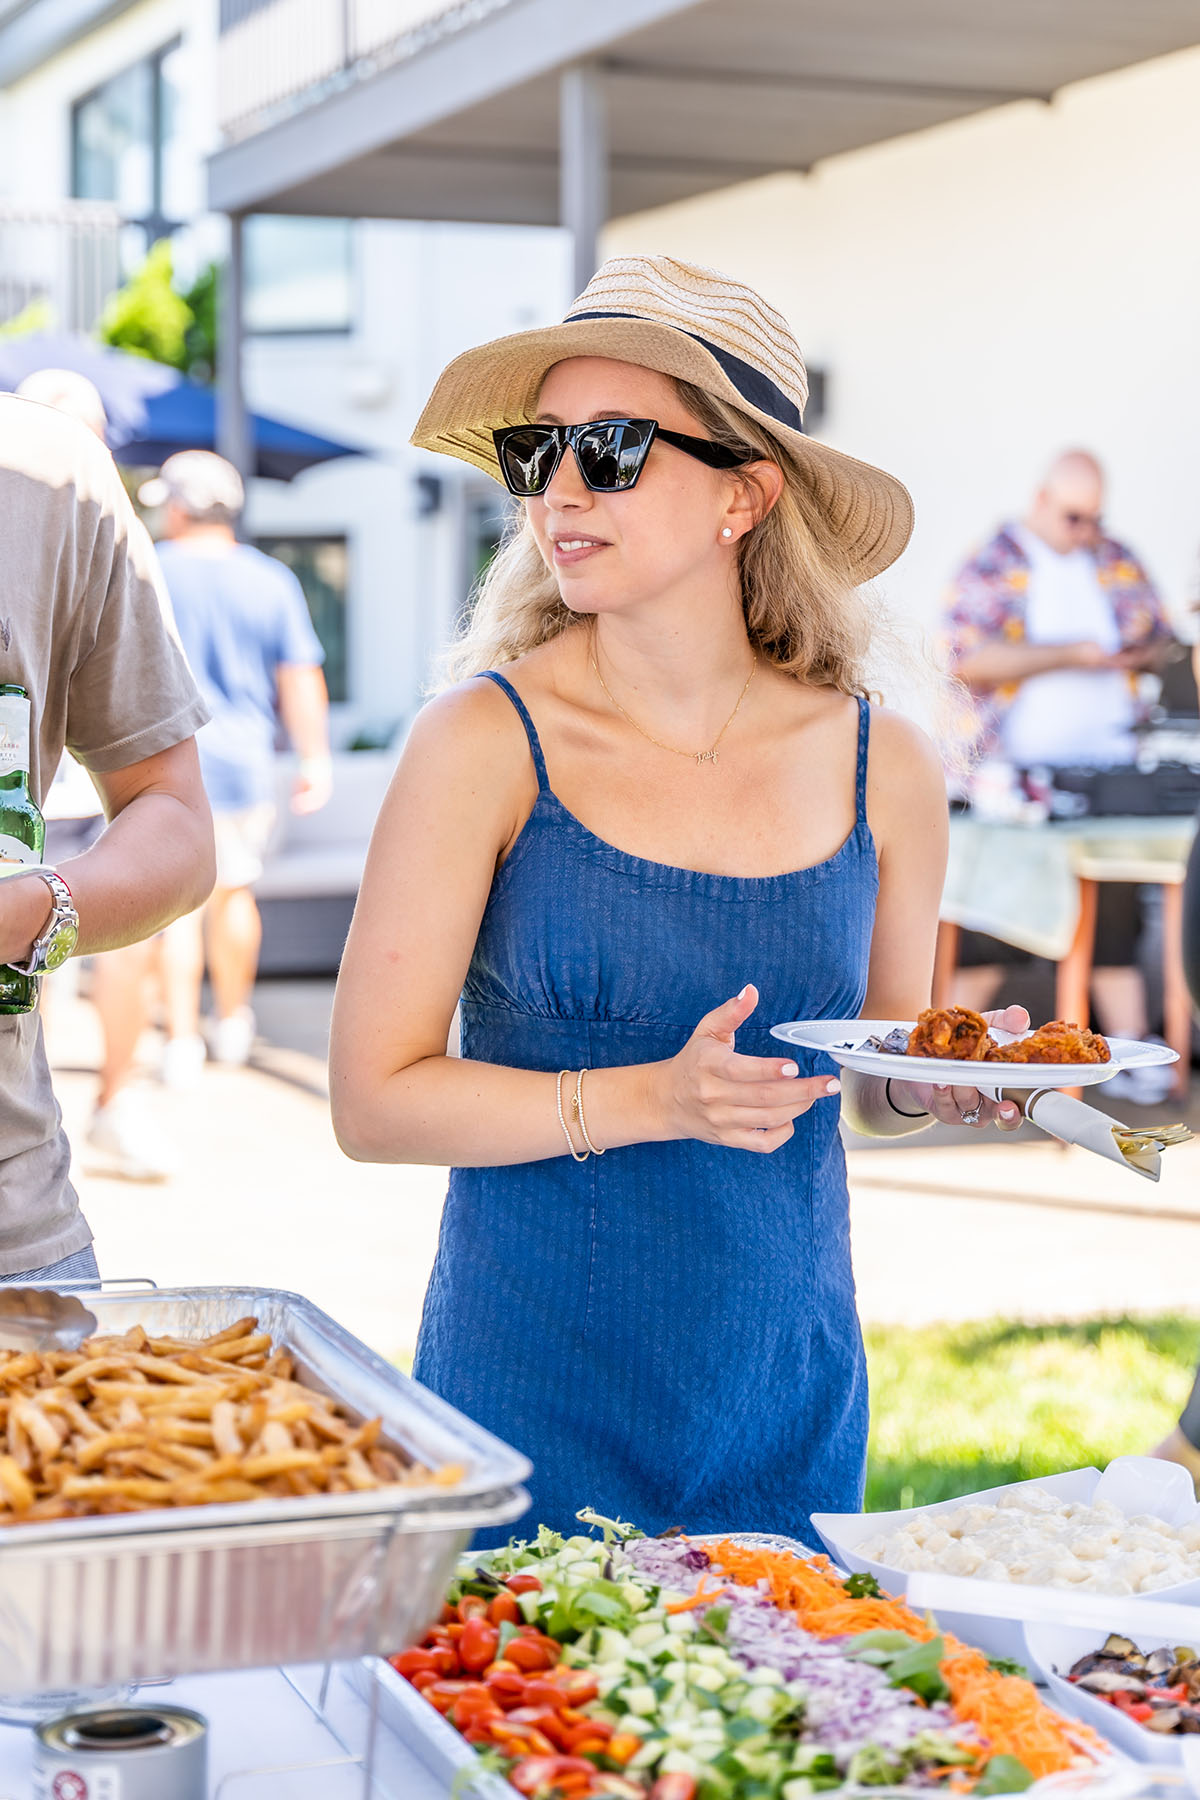 woman in blue dress with sunglasses and hat is holding food on a plate